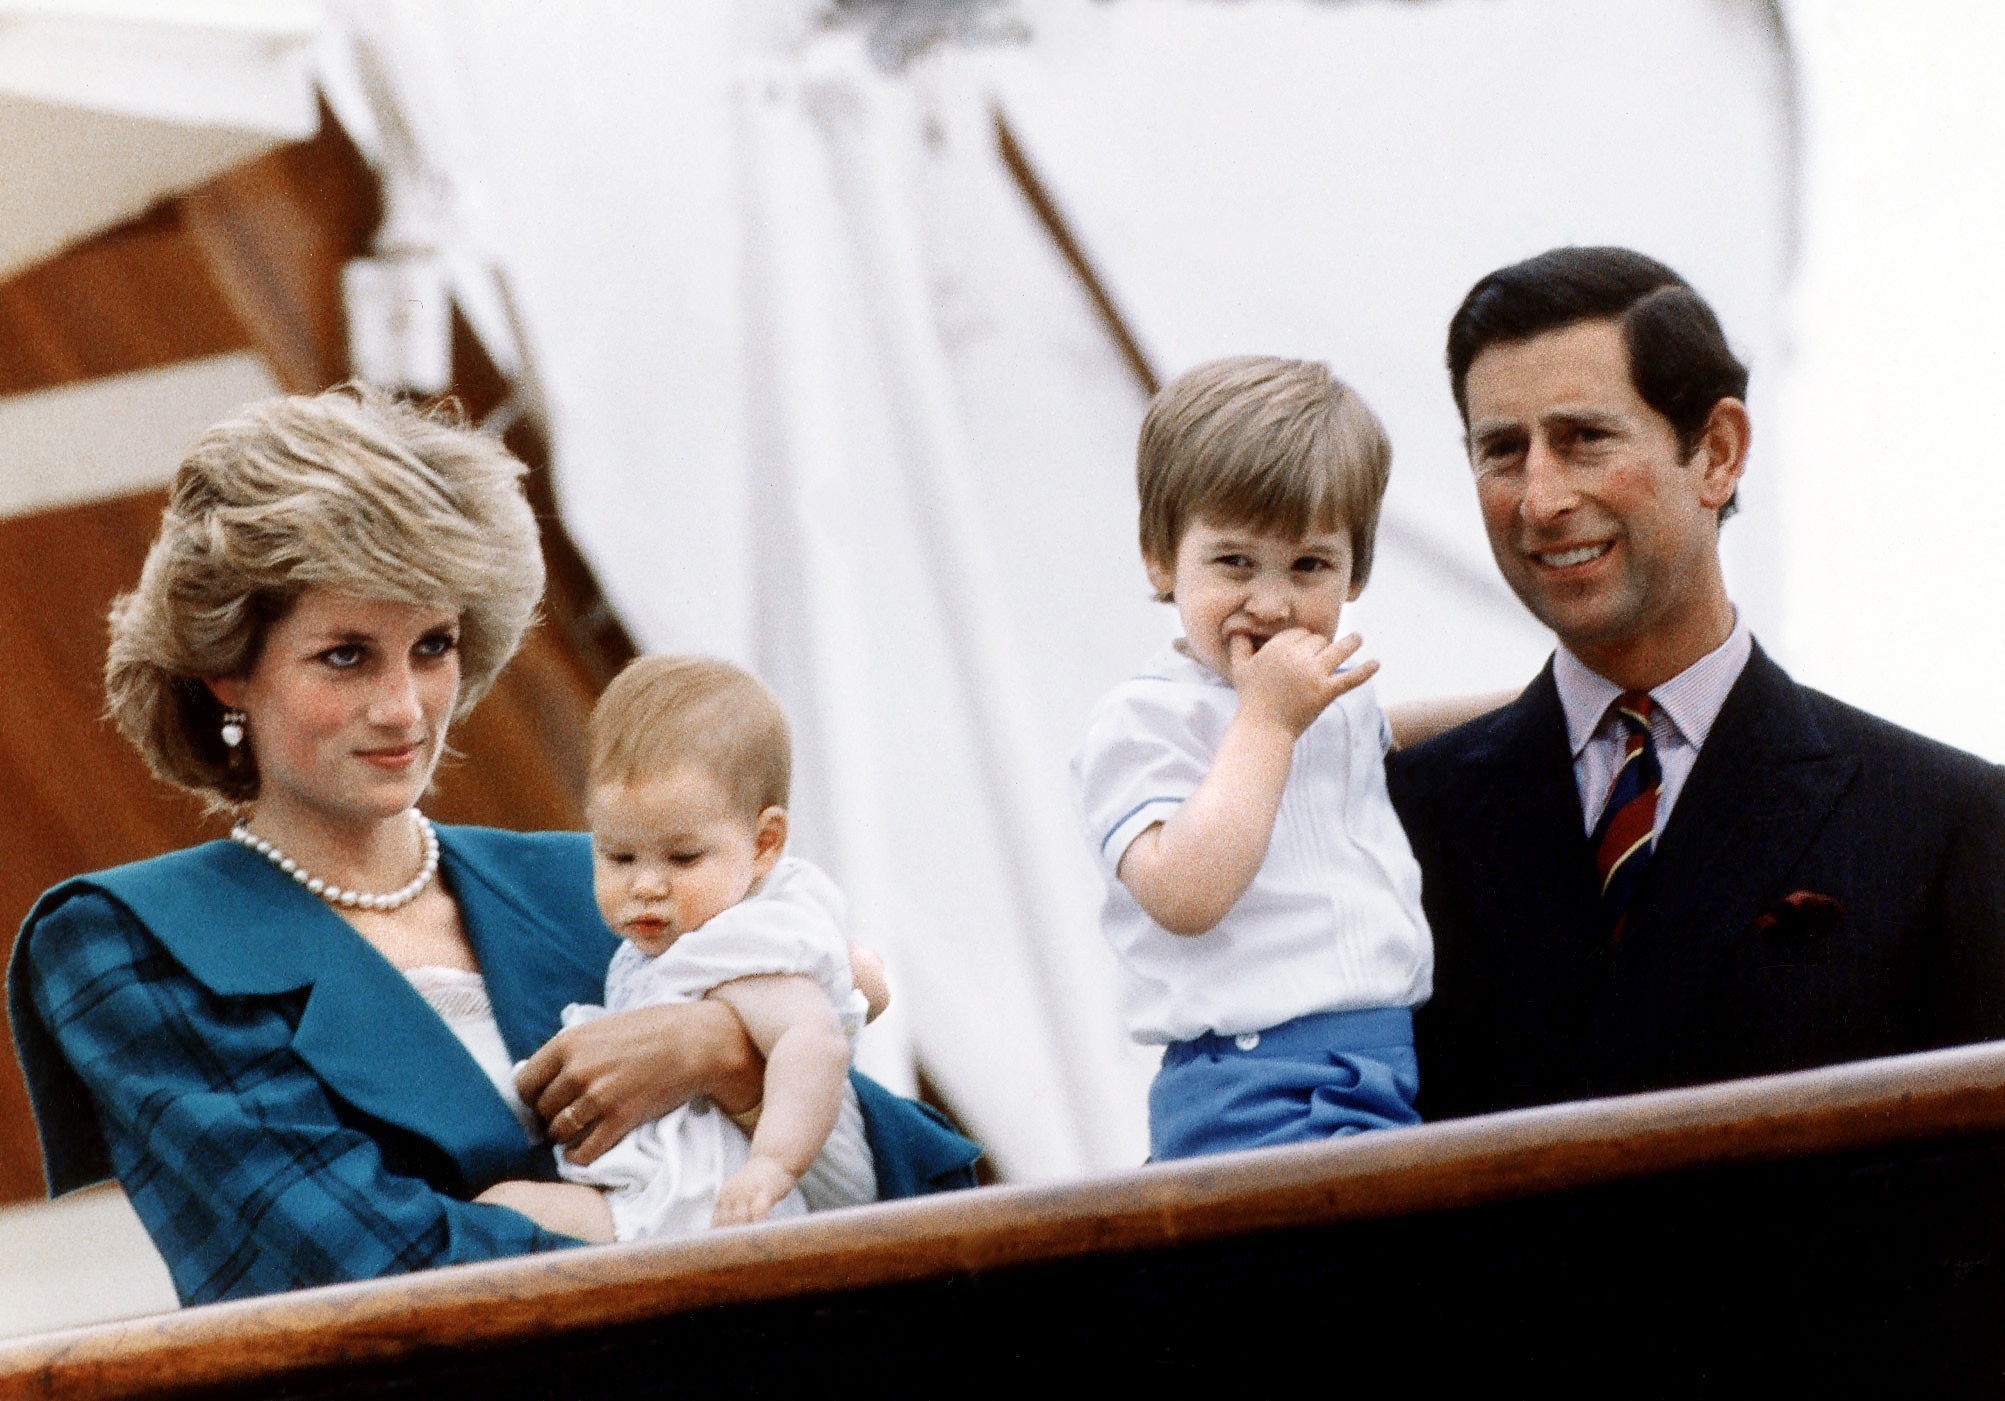 Princess Diana, Prince Harry, Prince William and Prince Charles on board royal yacht Britannia on May 6, 1985 in Venice, Italy. | Source: Getty Images